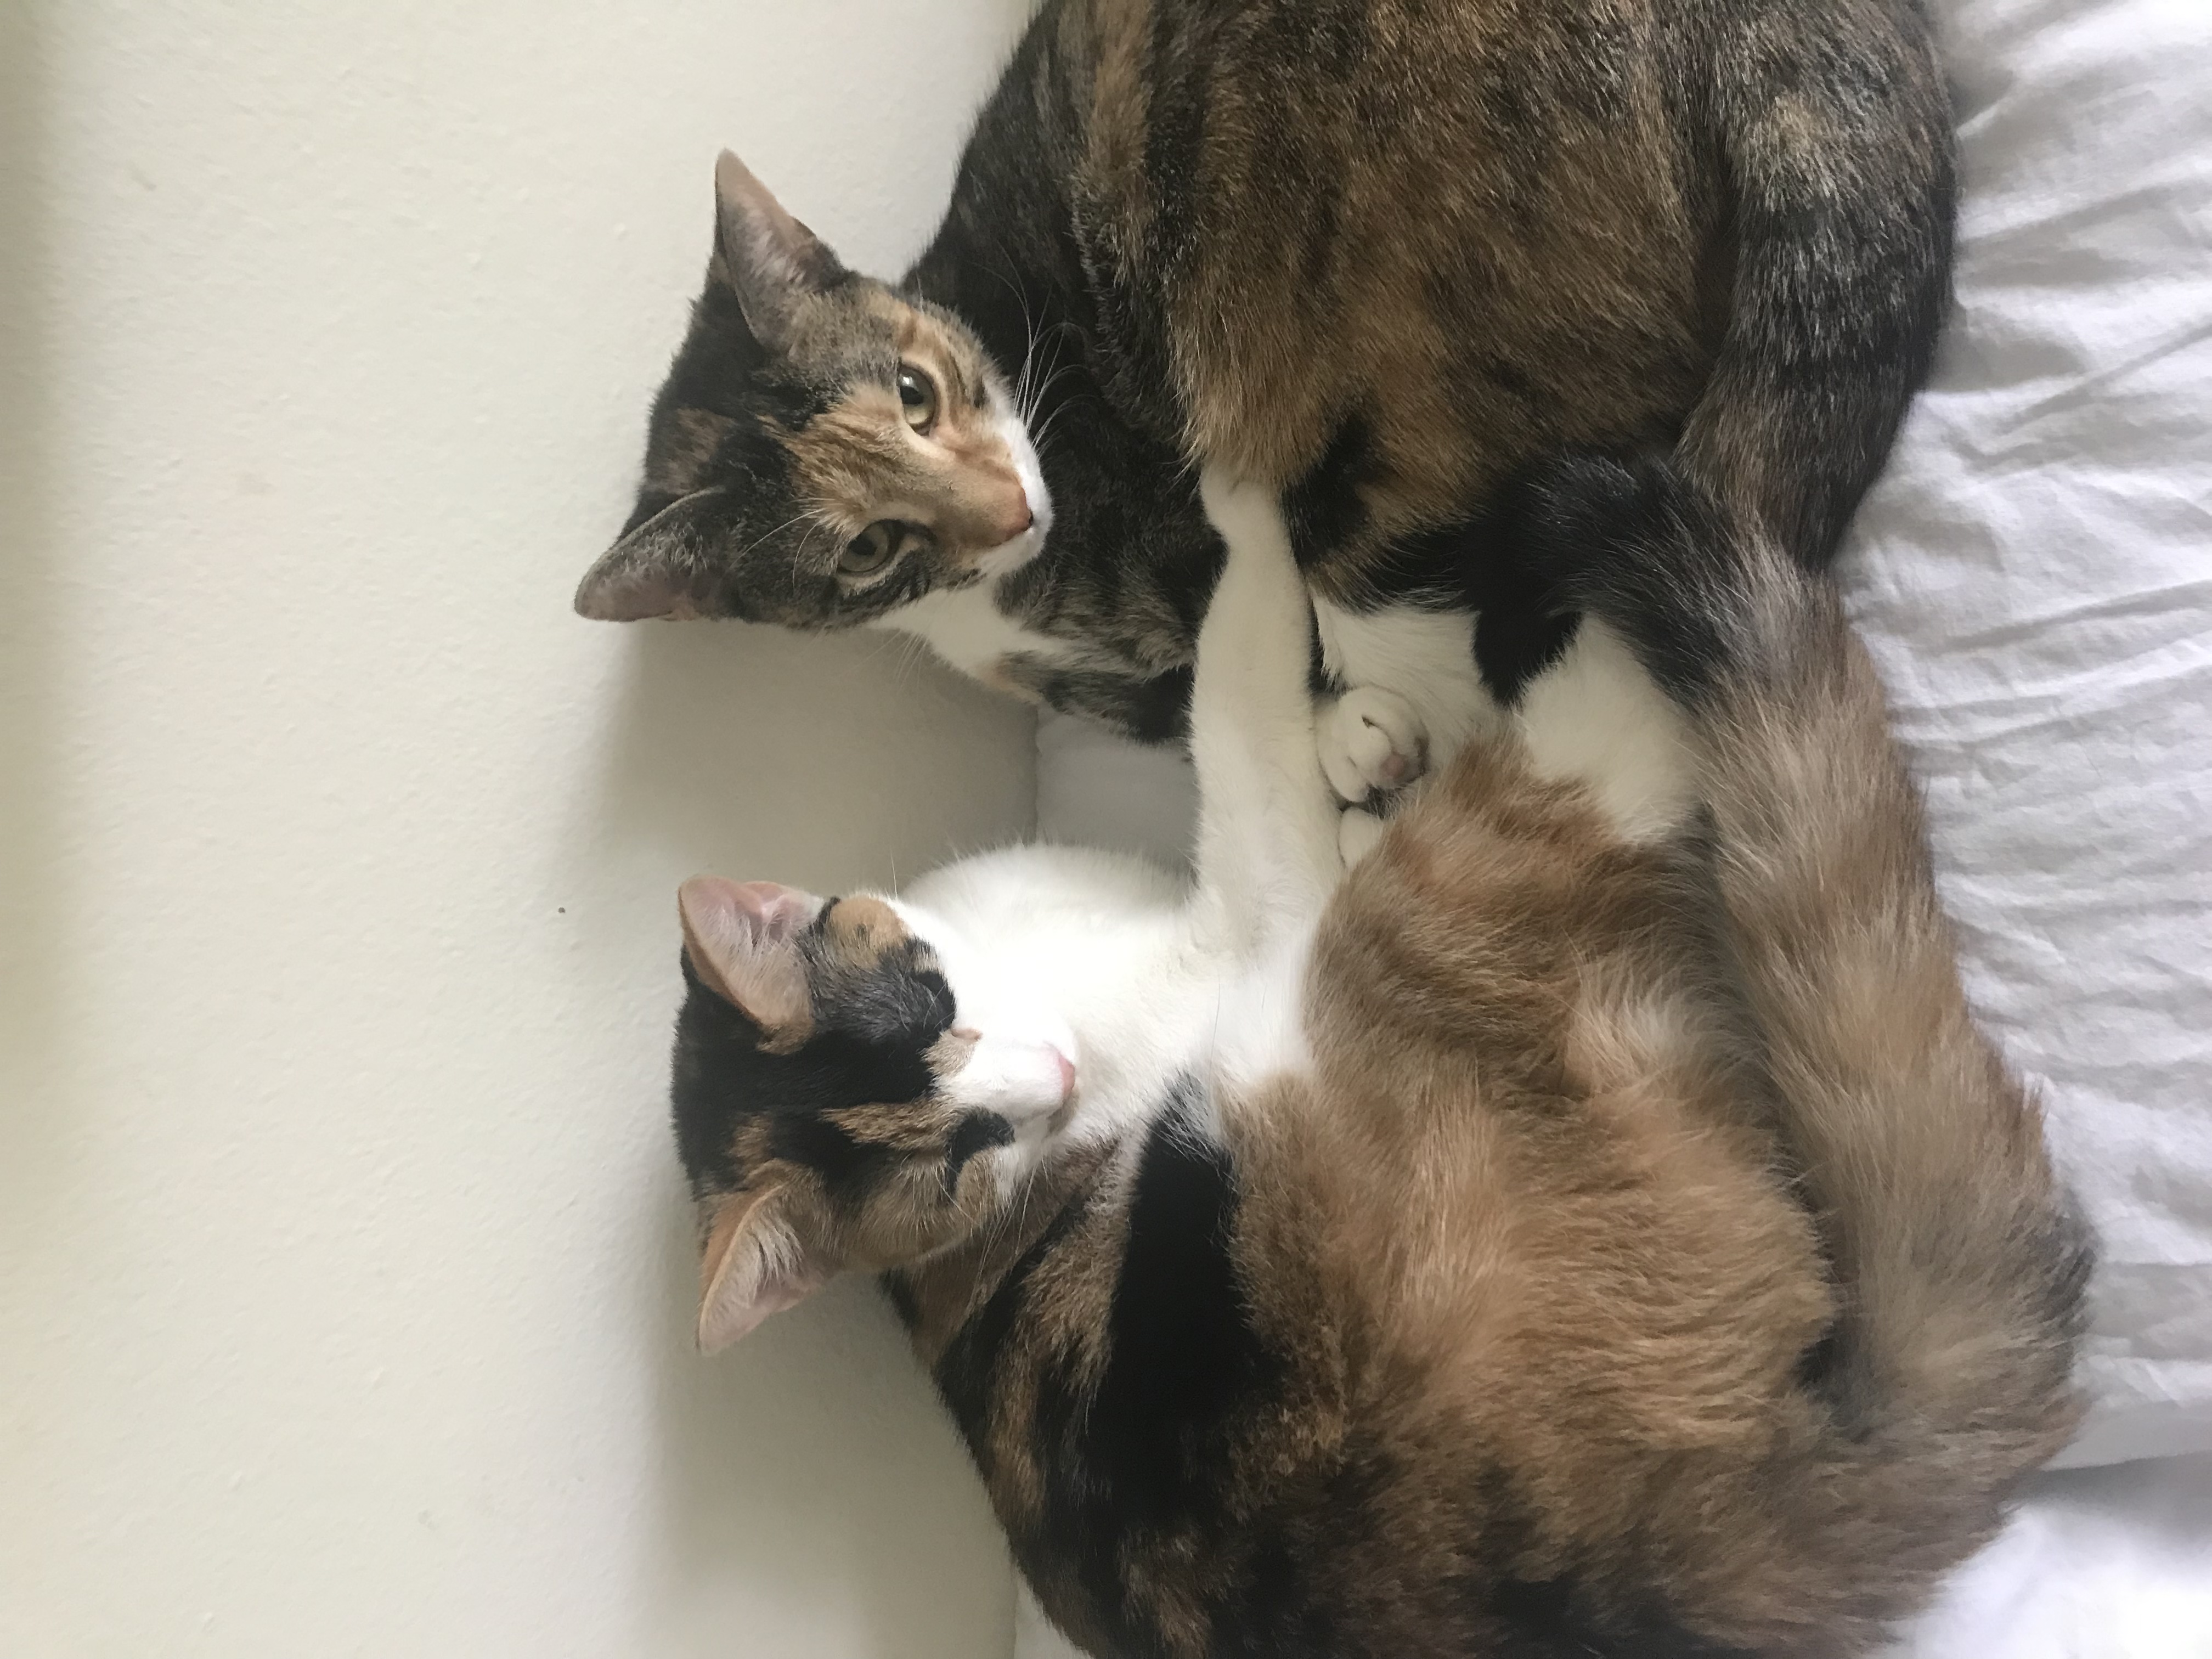 adoptable Cat in Hudson,FL named Thelma and Louise. Sisters.